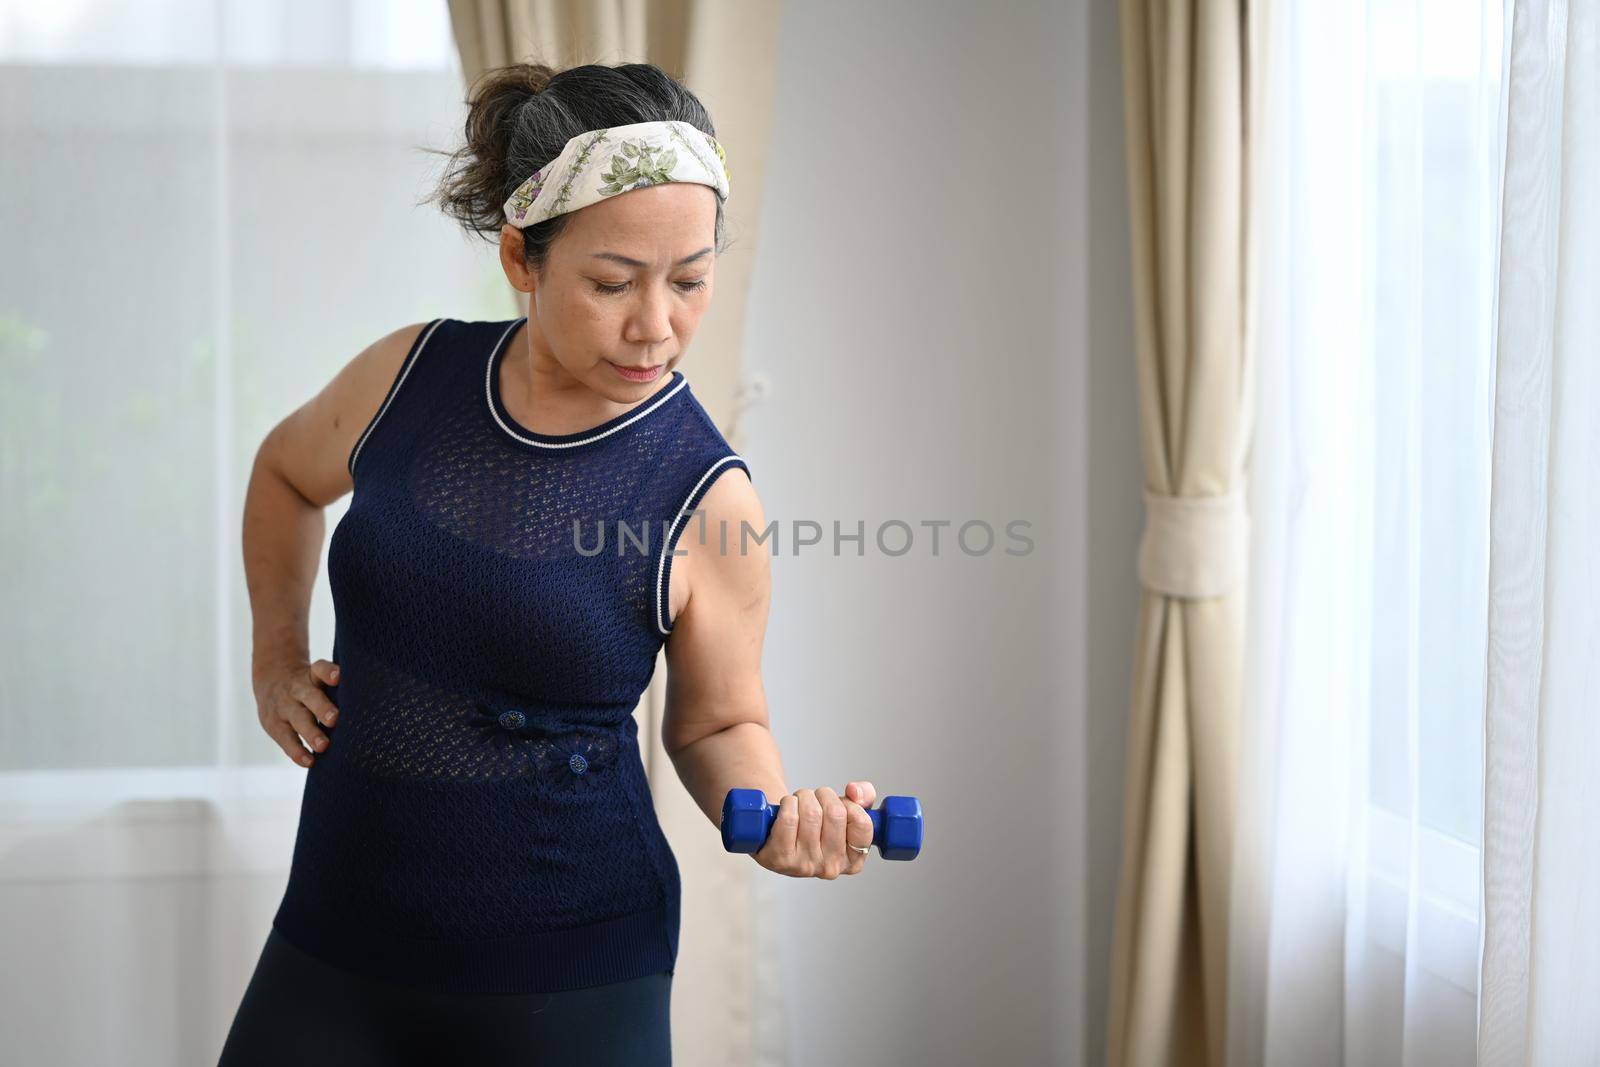 Sporty mature woman doing her workout routine, exercising with dumbbells at home. Healthy lifestyle and sport concept.